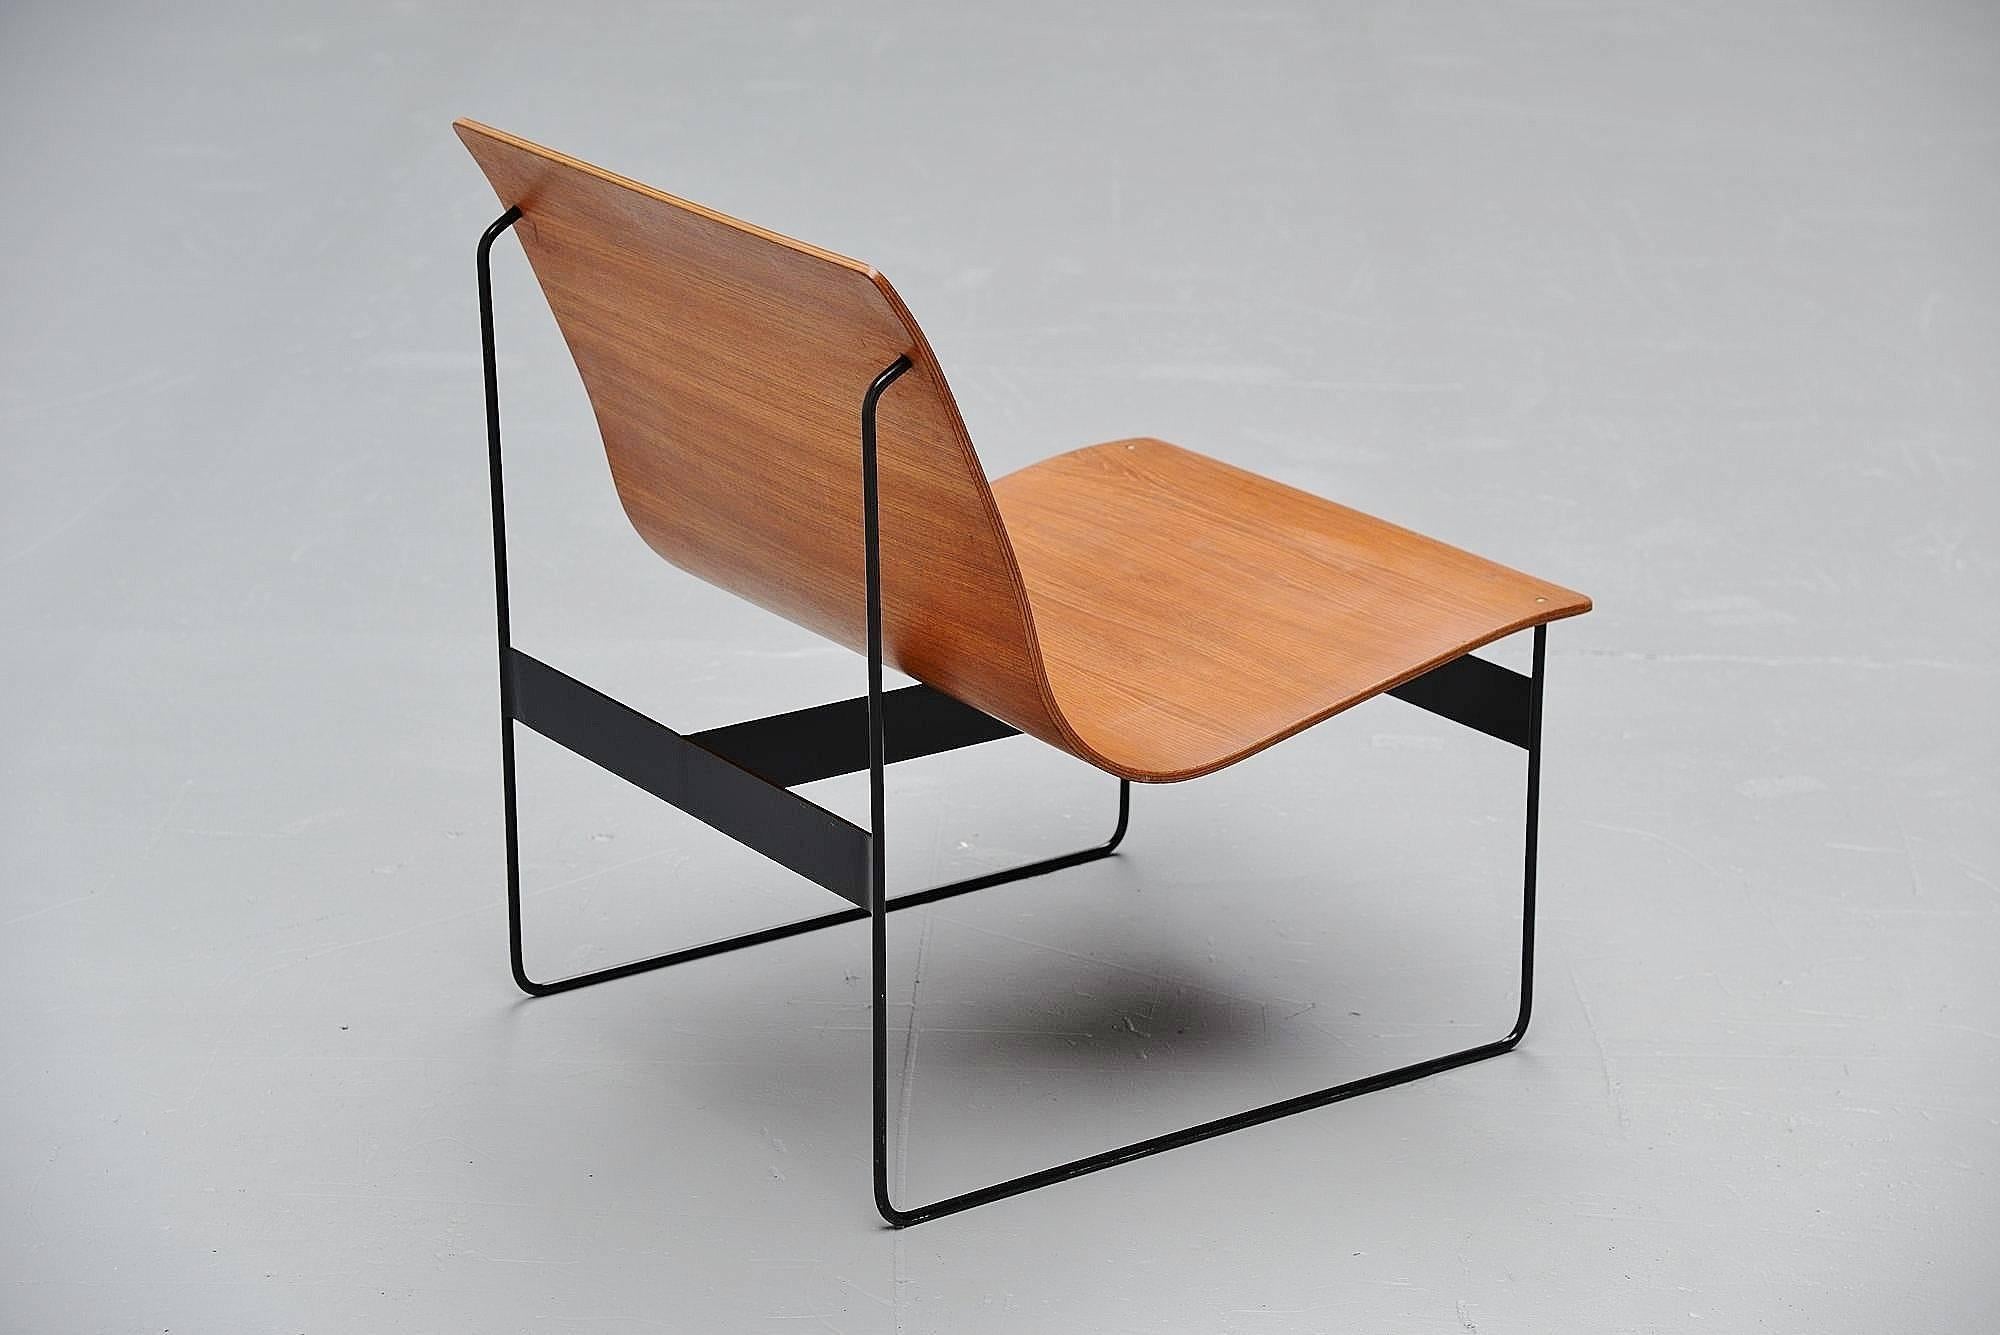 Lacquered Günter Renkel Lounge Chairs for Rego, Germany, 1959